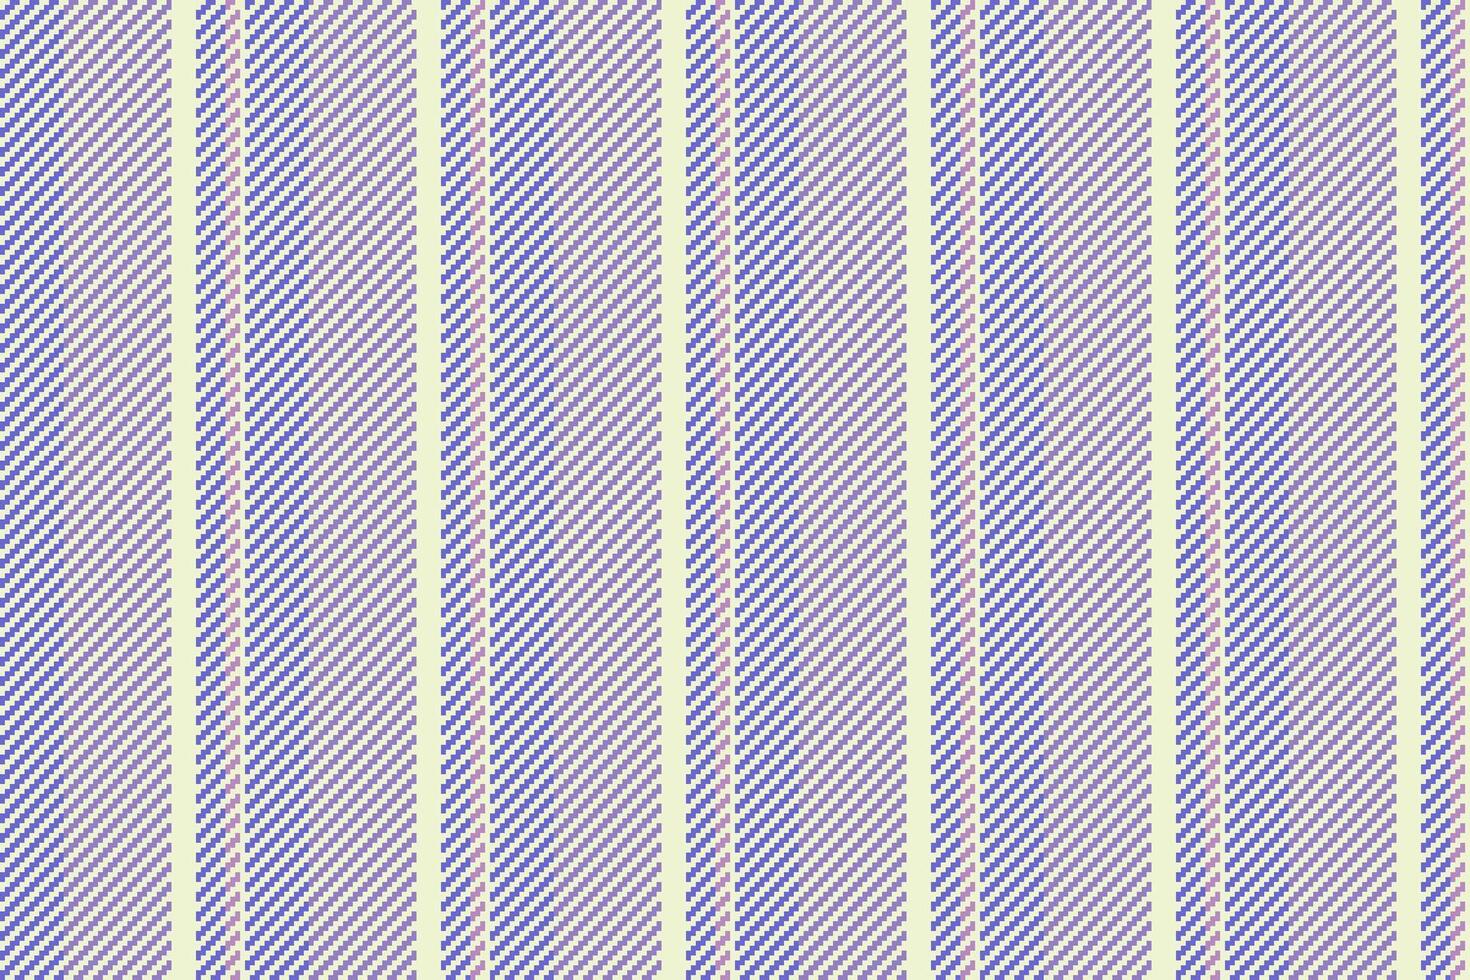 Texture lines pattern of vector fabric background with a stripe textile vertical seamless.